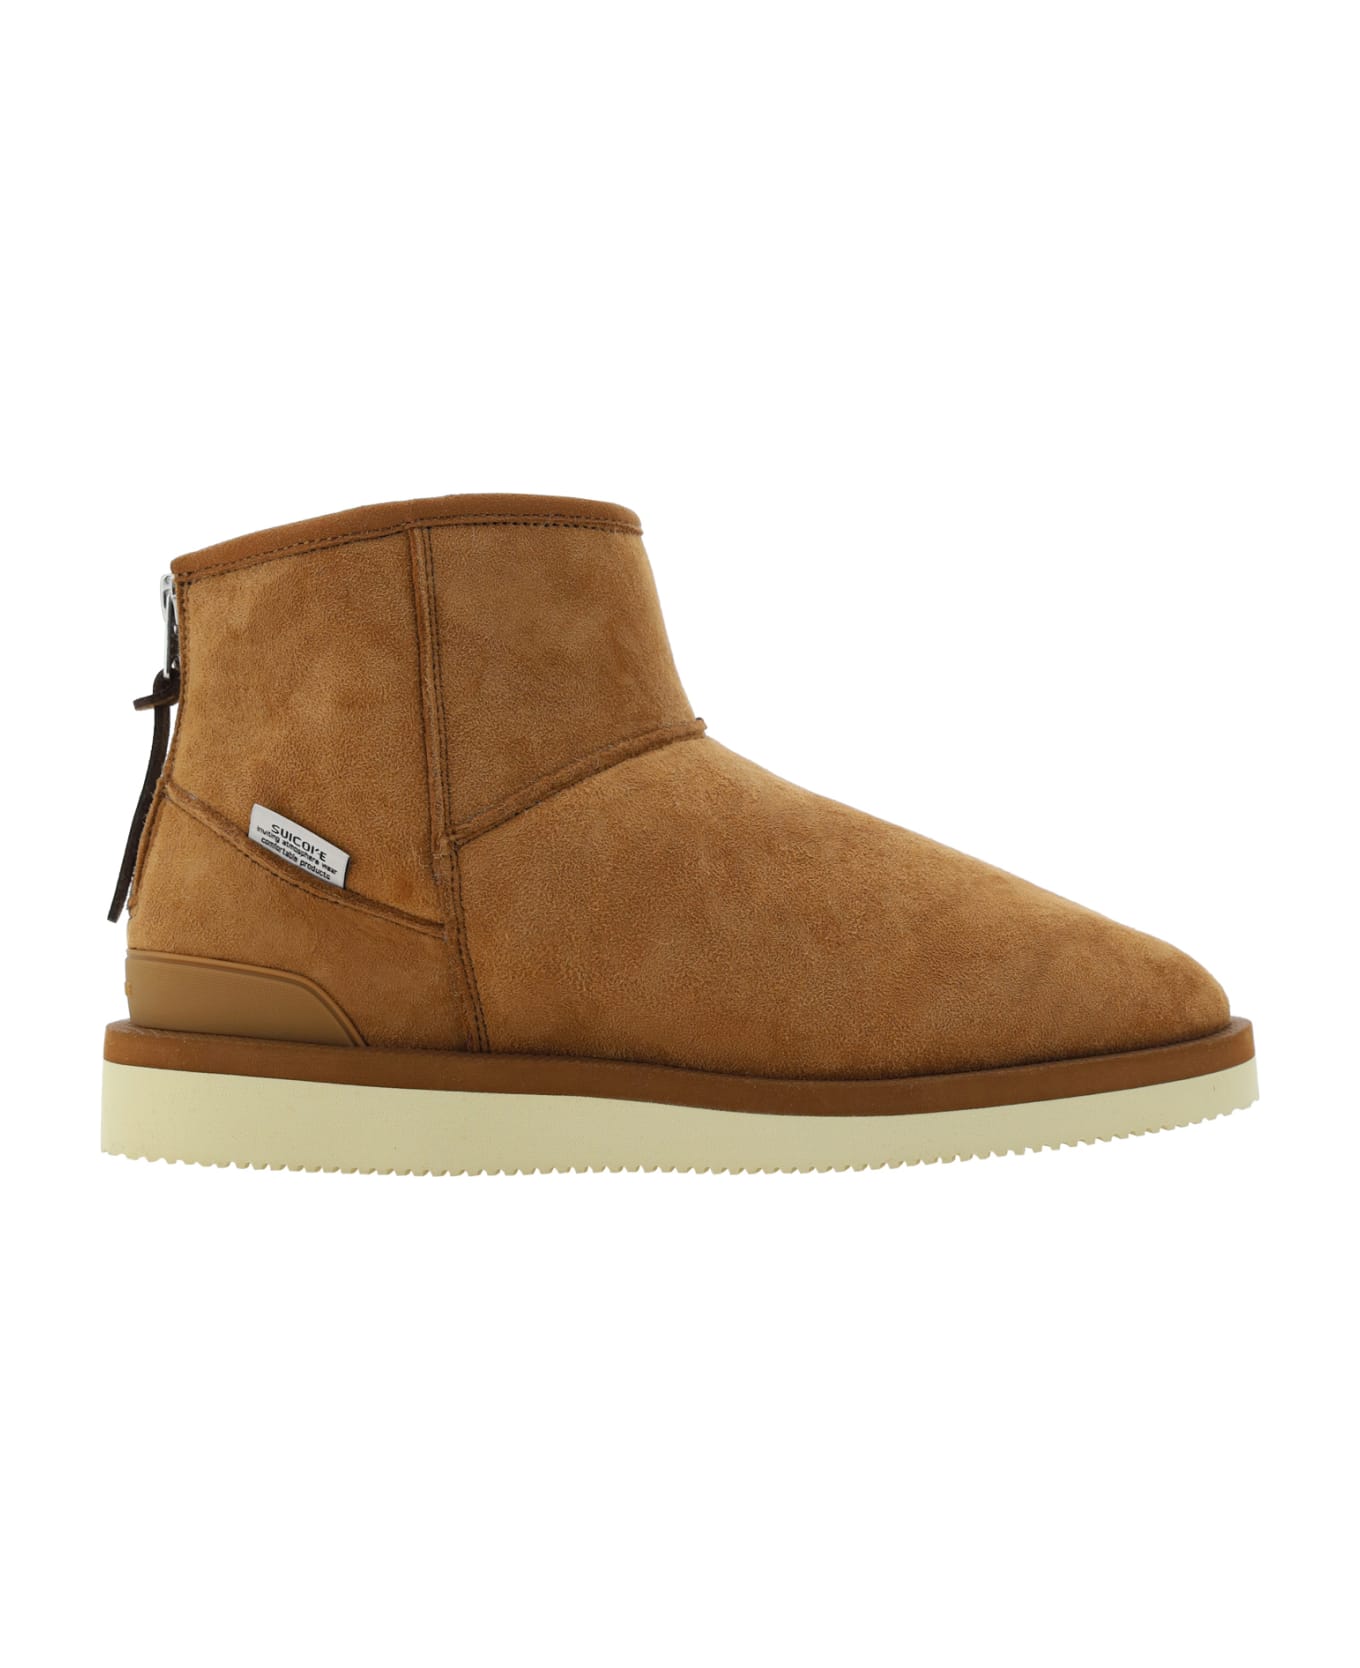 SUICOKE Els Ankle Boots - Brown name:458